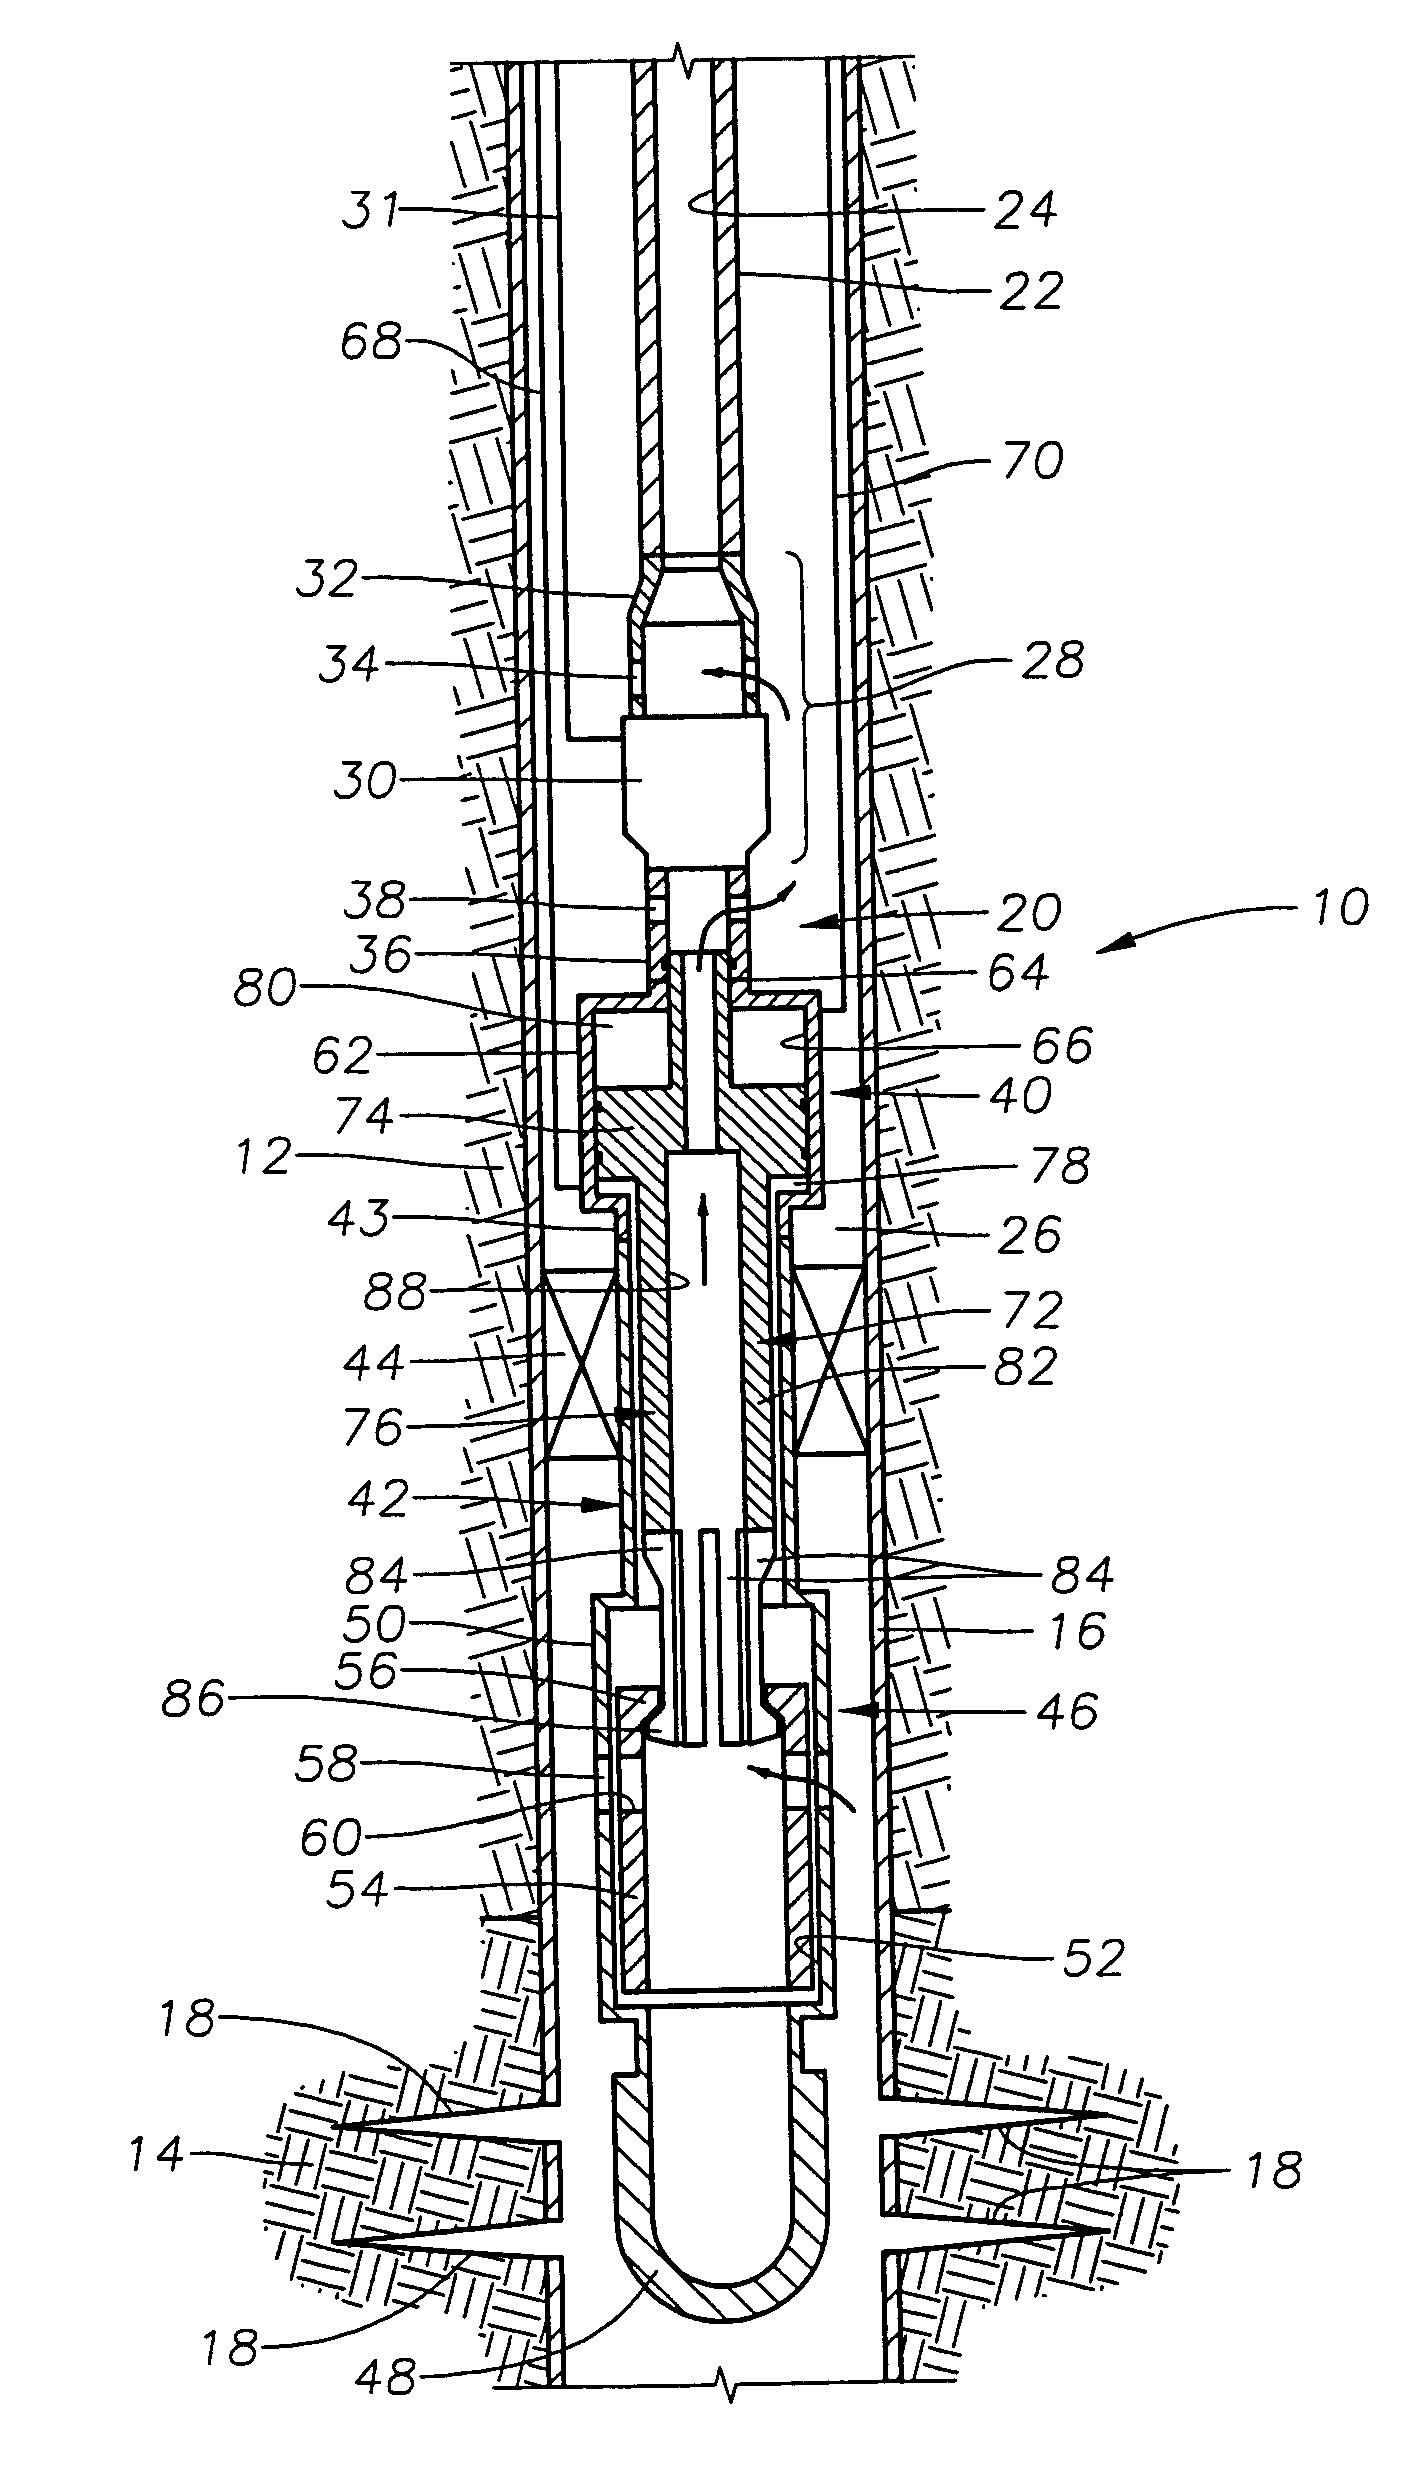 Method and apparatus to isolate a wellbore during pump workover